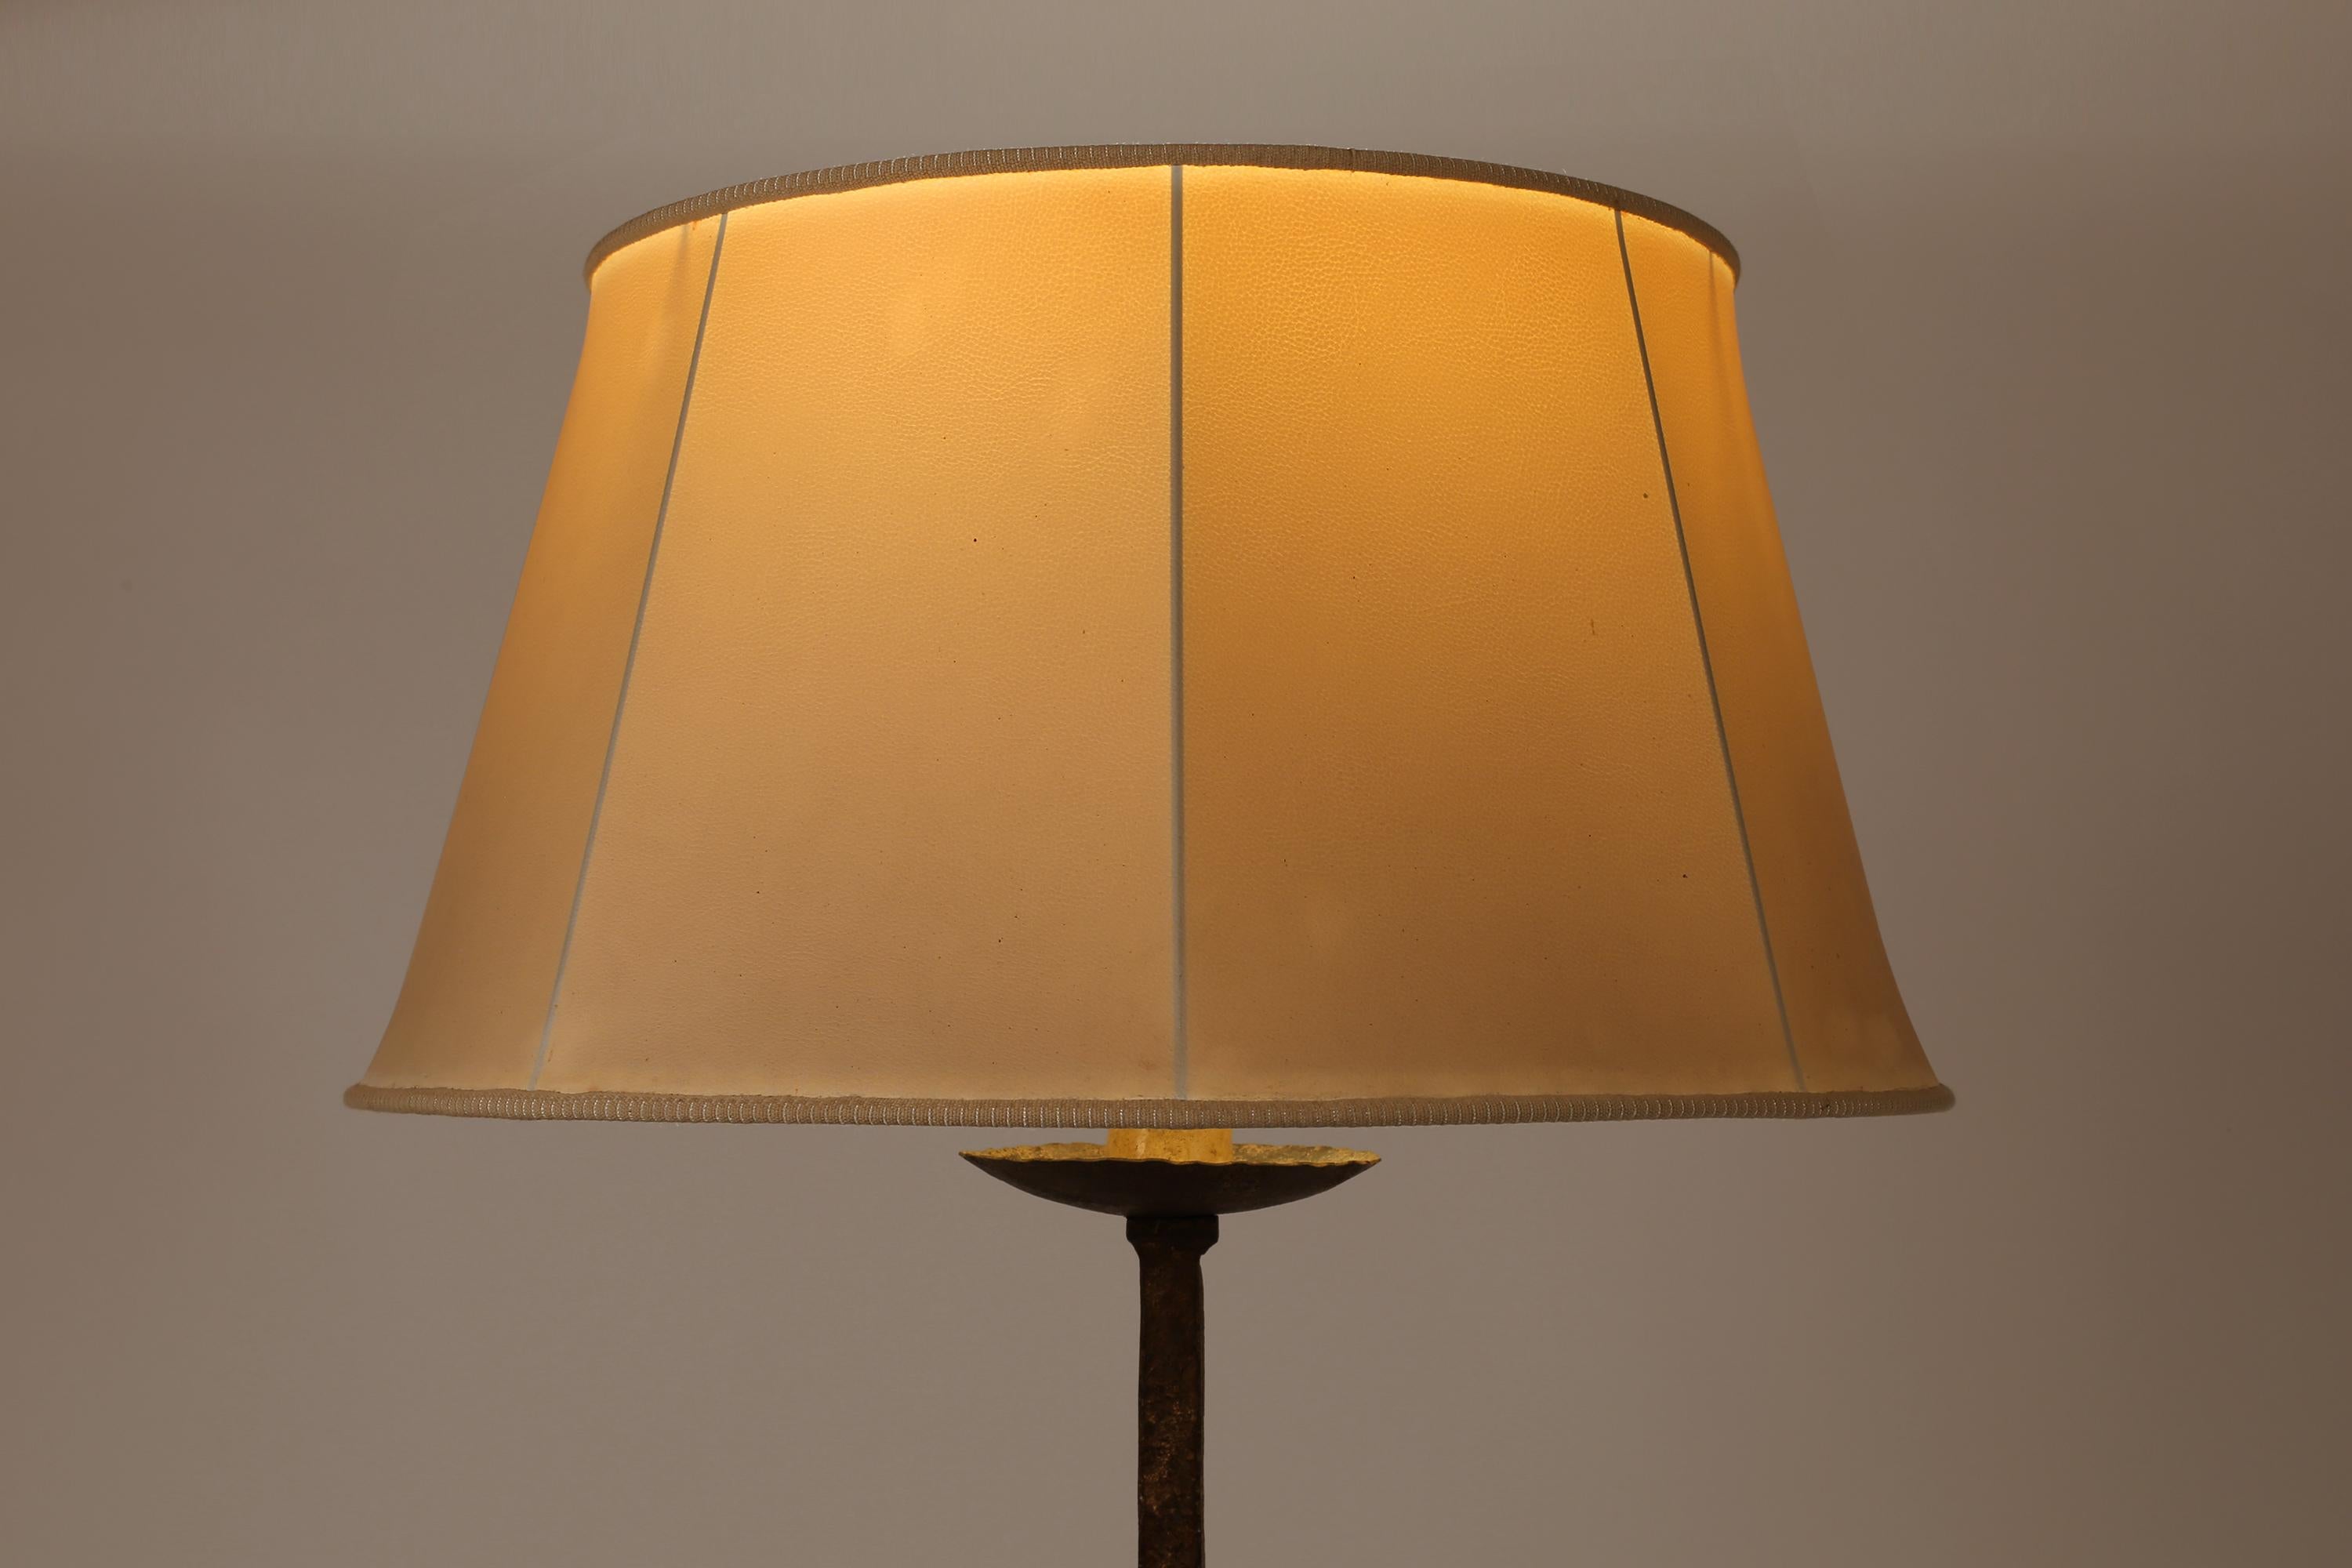 French 1940s Maison Ramsay Art Deco Floor Lamp In Gilt Forged Iron In Good Condition For Sale In London, GB